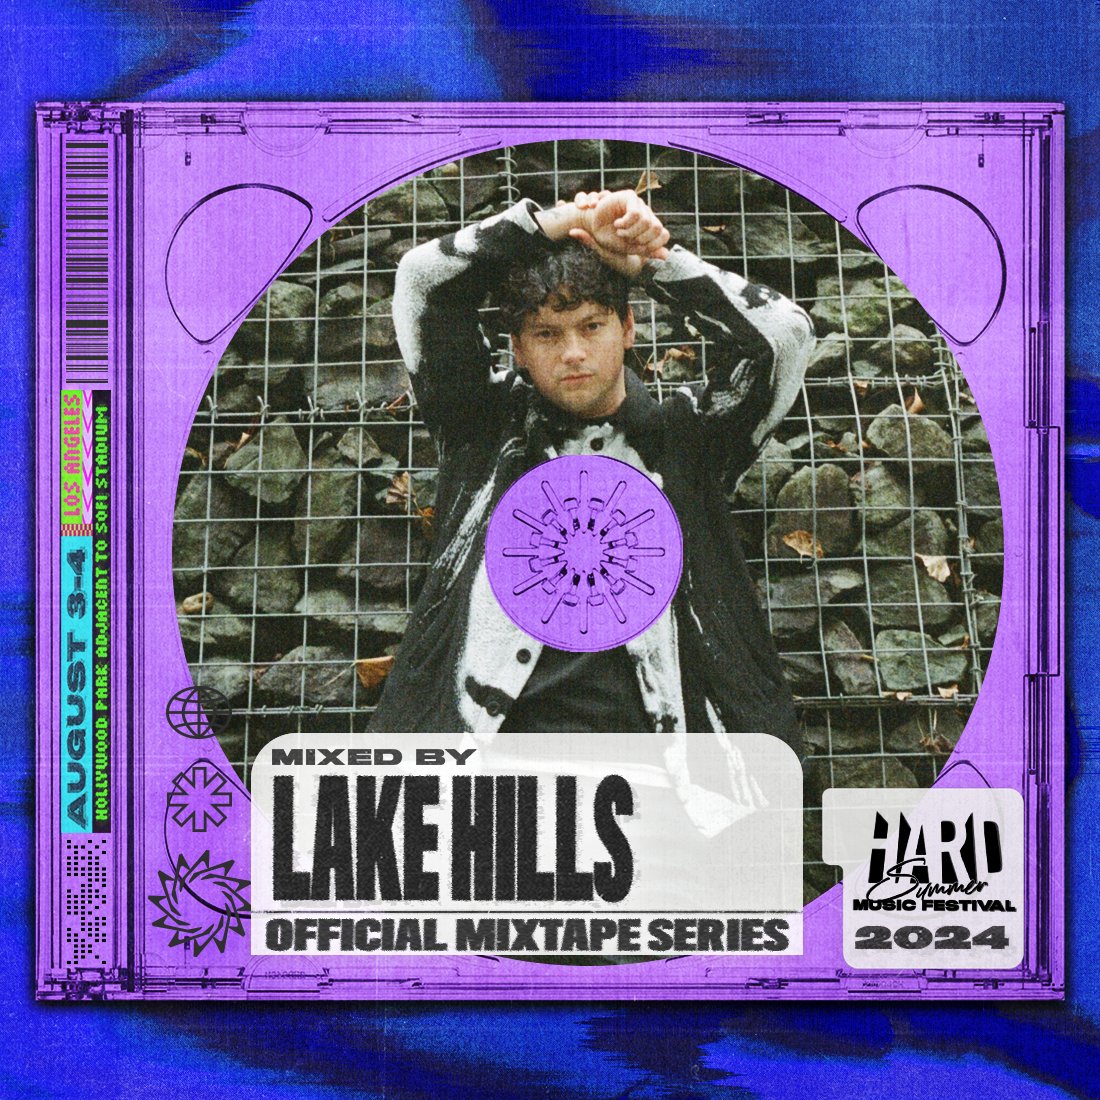 fresh off the release of 'Picking Flowers' on @HARDrecs, we've got @LakeHills_ tapping in for the next HSMF 2K24 Mixtape 💿 Listen at hardfest.co/2k24-mixtapes Catch him this Saturday in LA w/ @intergalacticz, @invt305, Corey Sizemore b2b Richie Panic 🎟 hardfest.co/hard-ldl